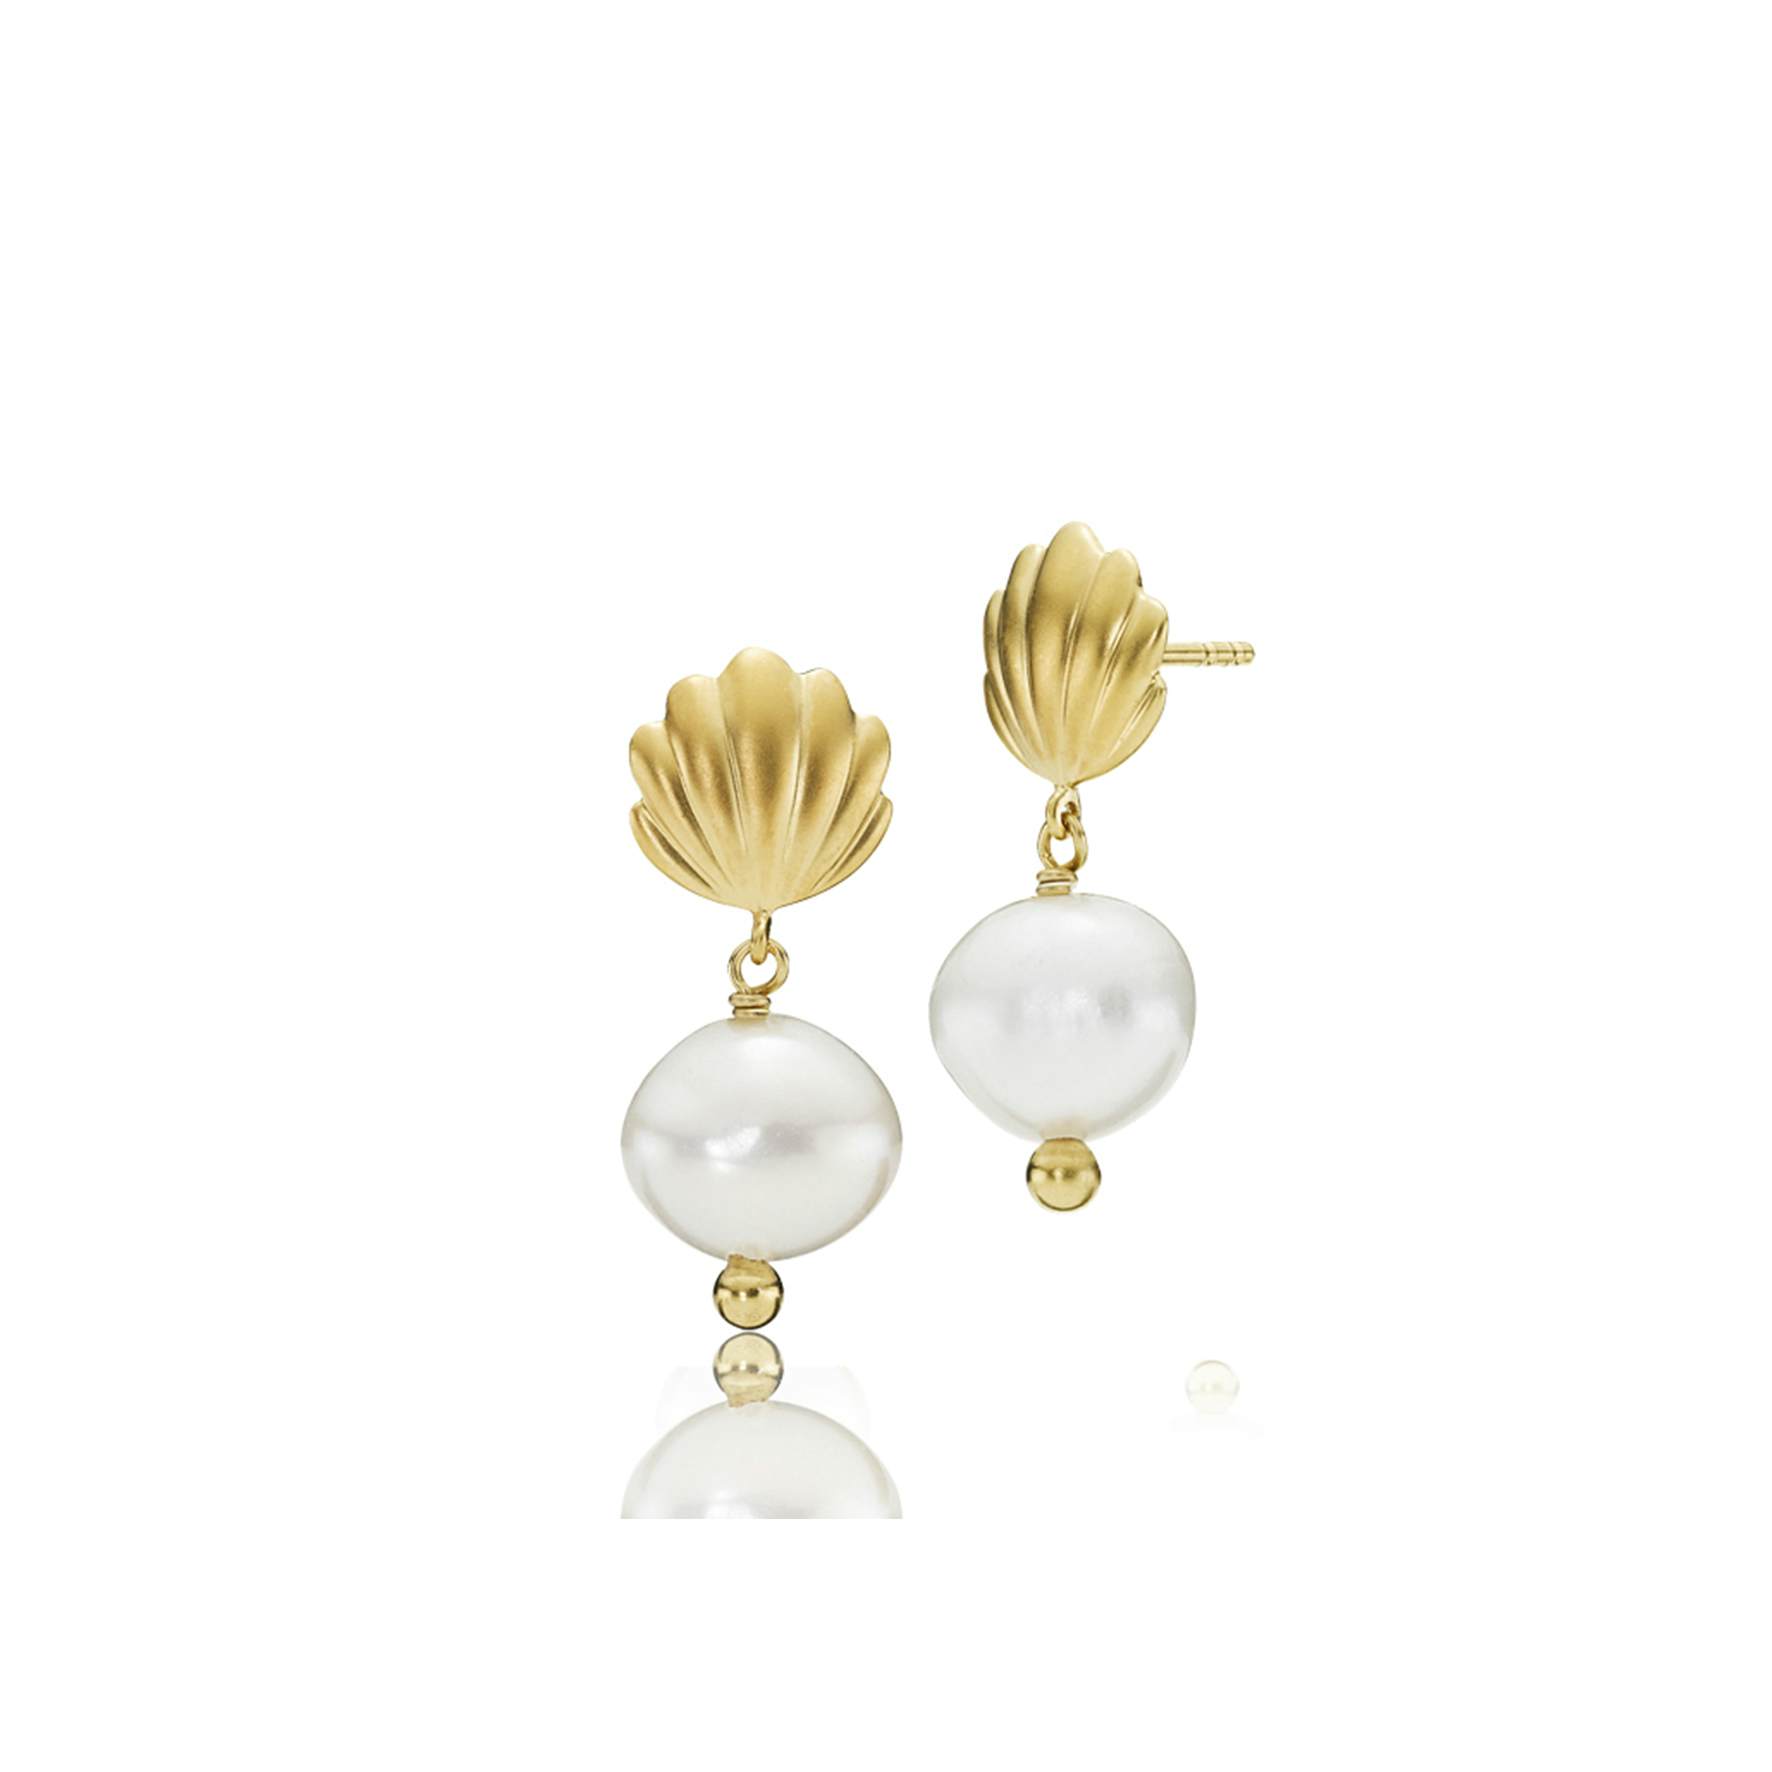 Isabella White Earrings from Izabel Camille in Goldplated-Silver Sterling 925|Freshwater Pearl